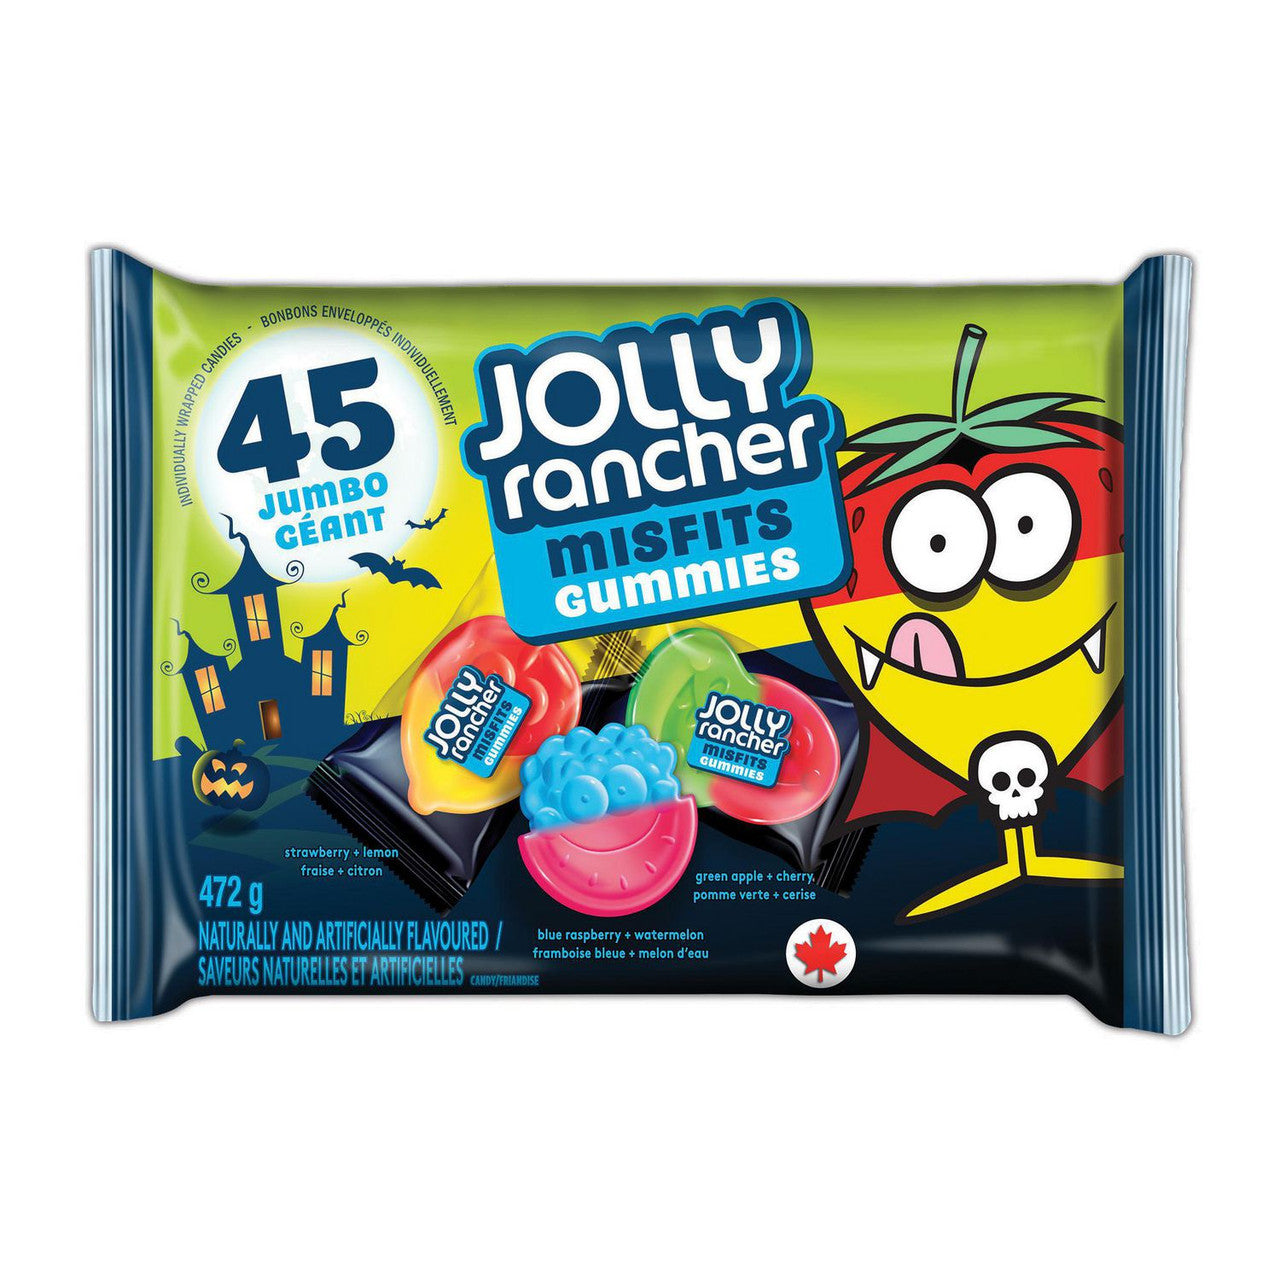 Jolly Rancher Misfit Assorted Halloween Gummies, 45ct, 472g/1 lb., Bag {Imported from Canada}